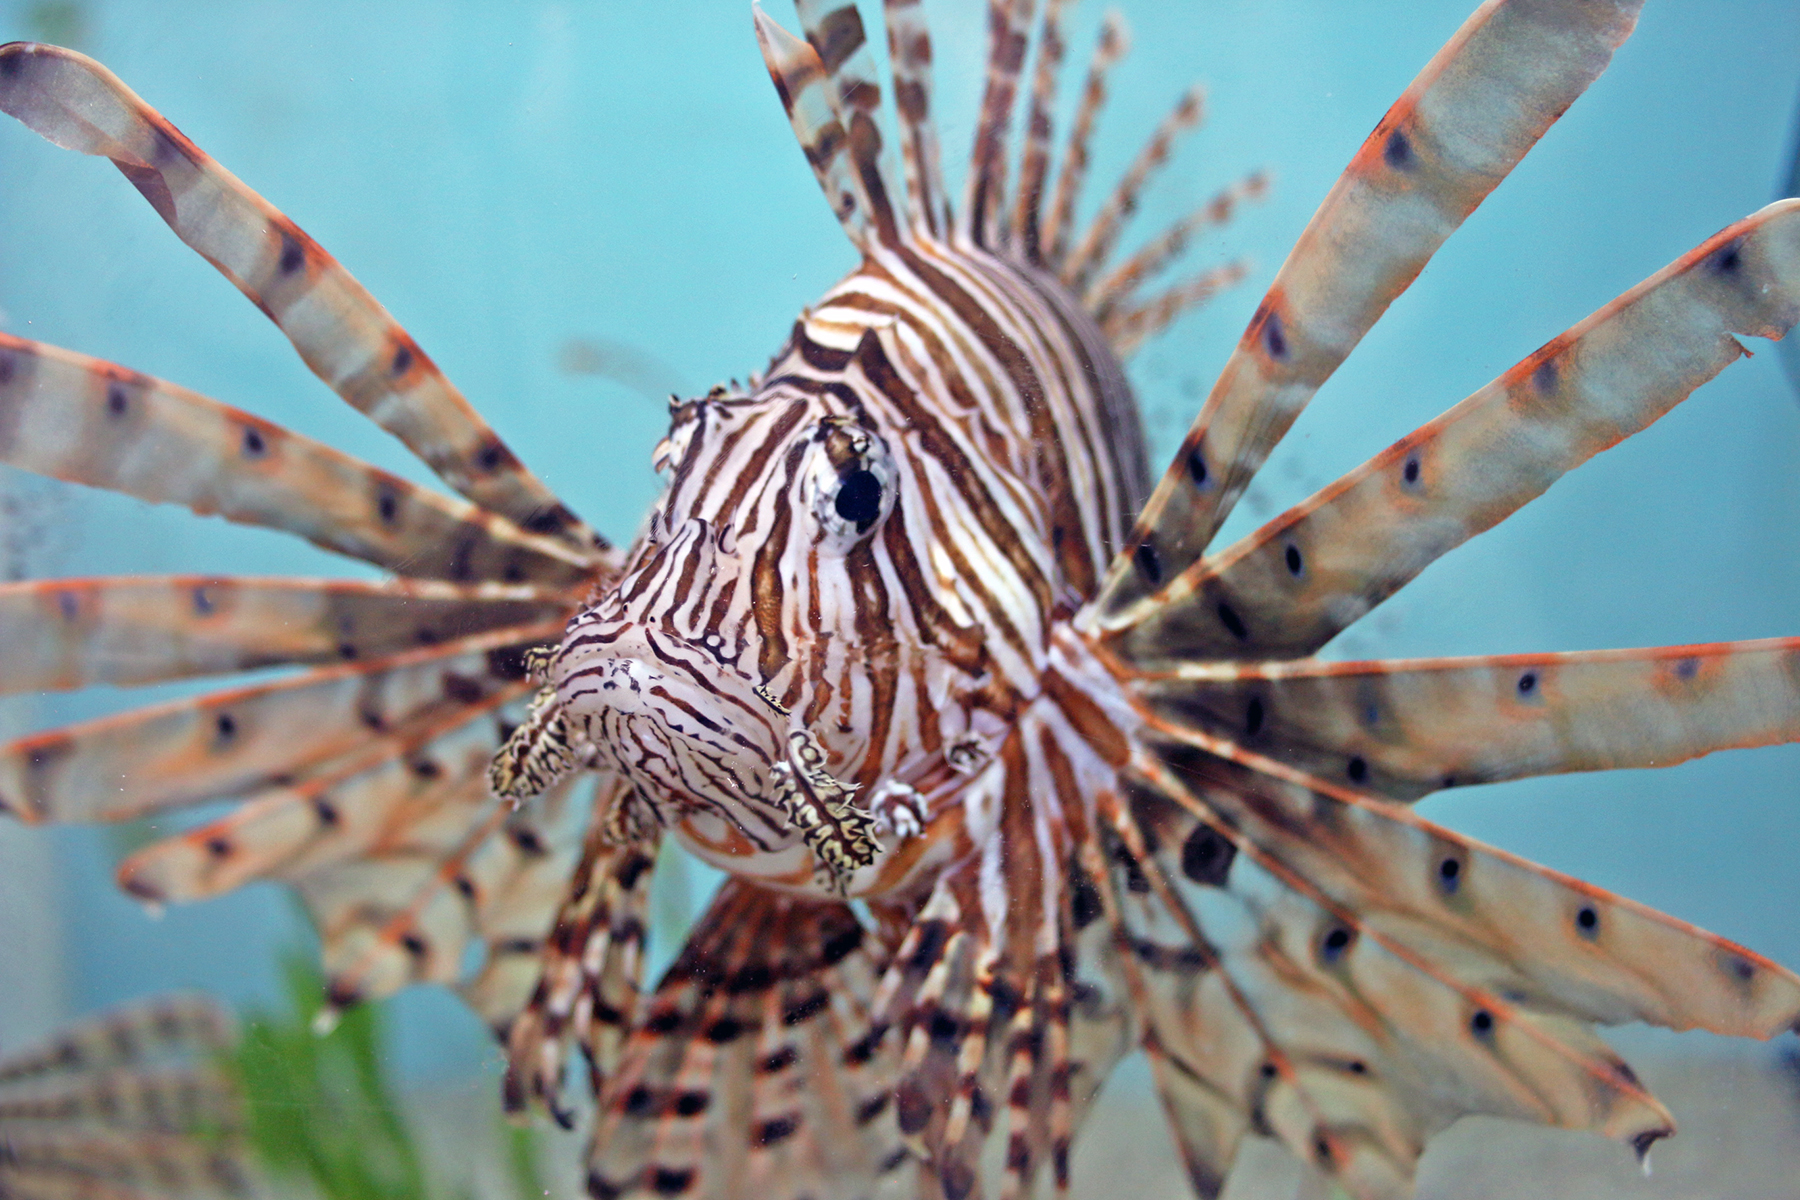 A lionfish with it's fins fanned out and spines visible